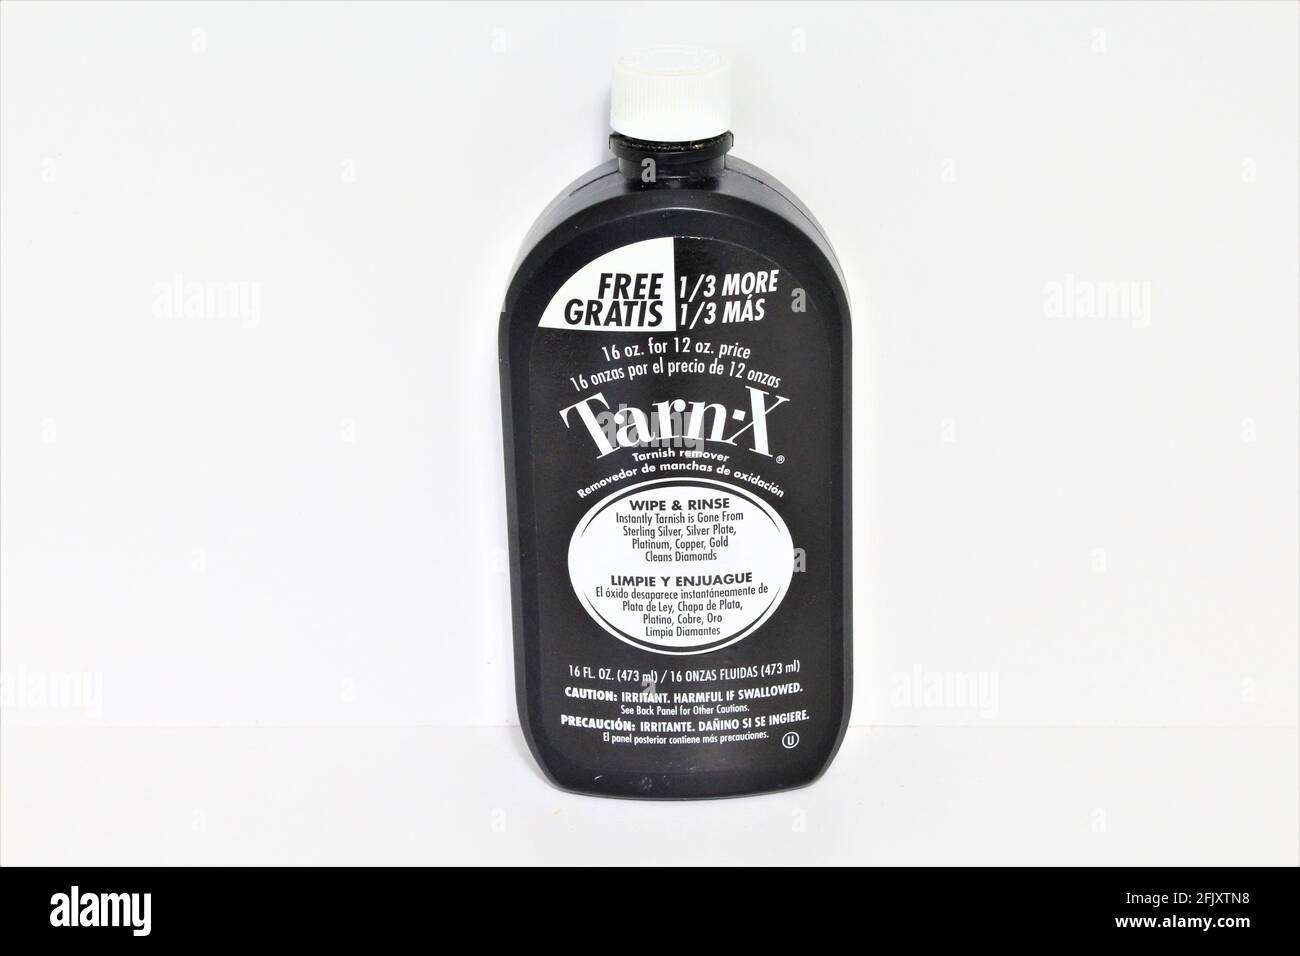 Black bottle of Tarn-X which eliminates tarnish from metals like